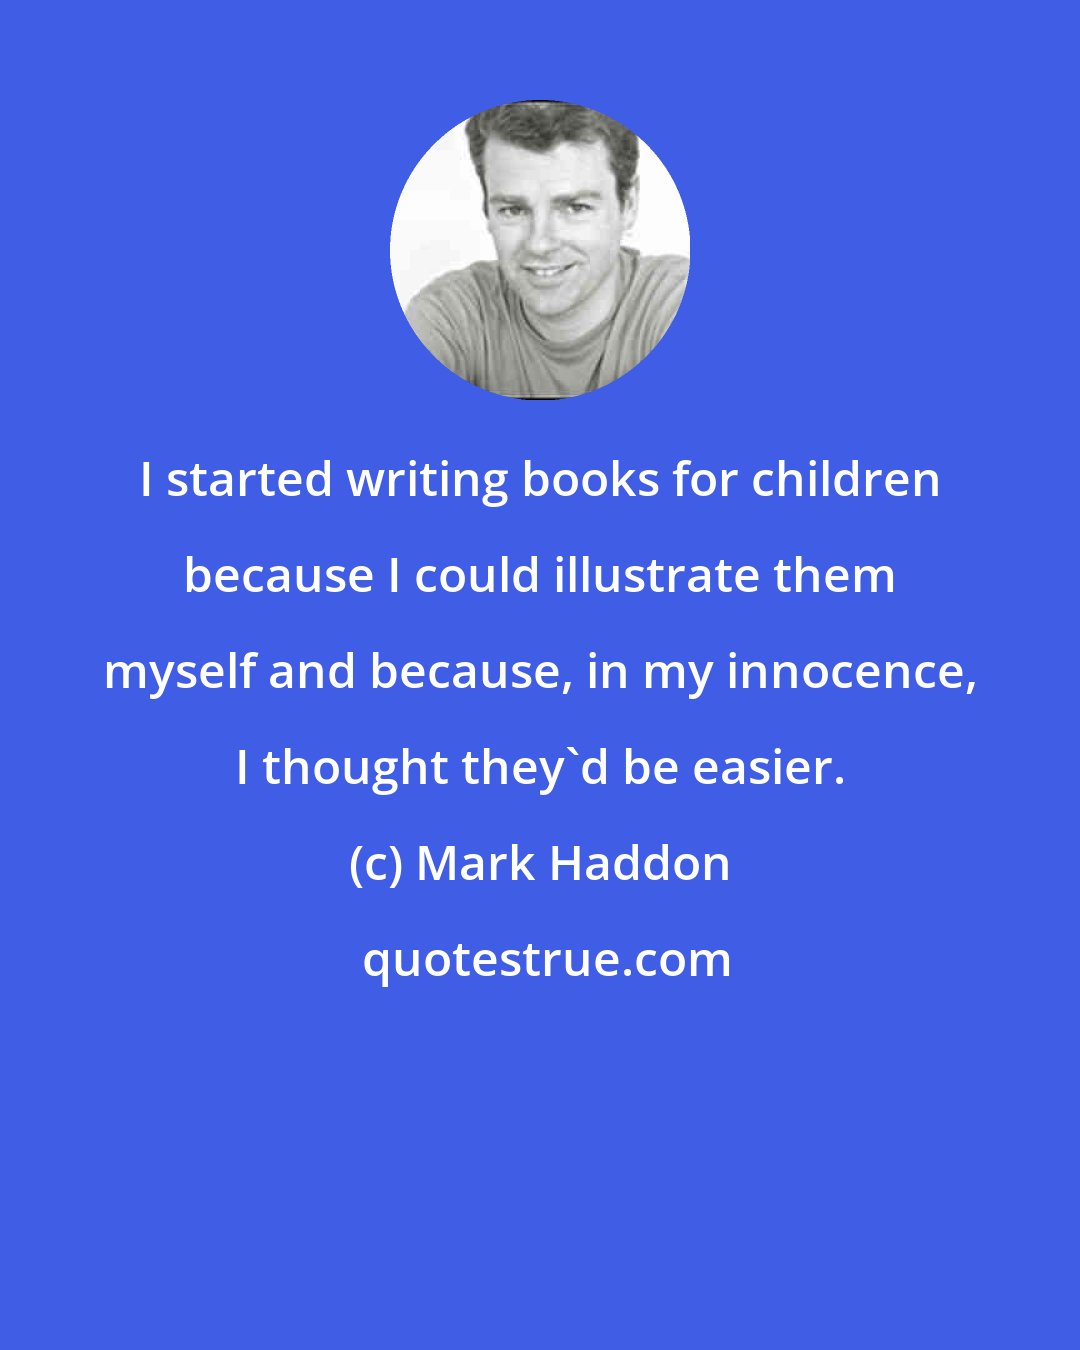 Mark Haddon: I started writing books for children because I could illustrate them myself and because, in my innocence, I thought they'd be easier.